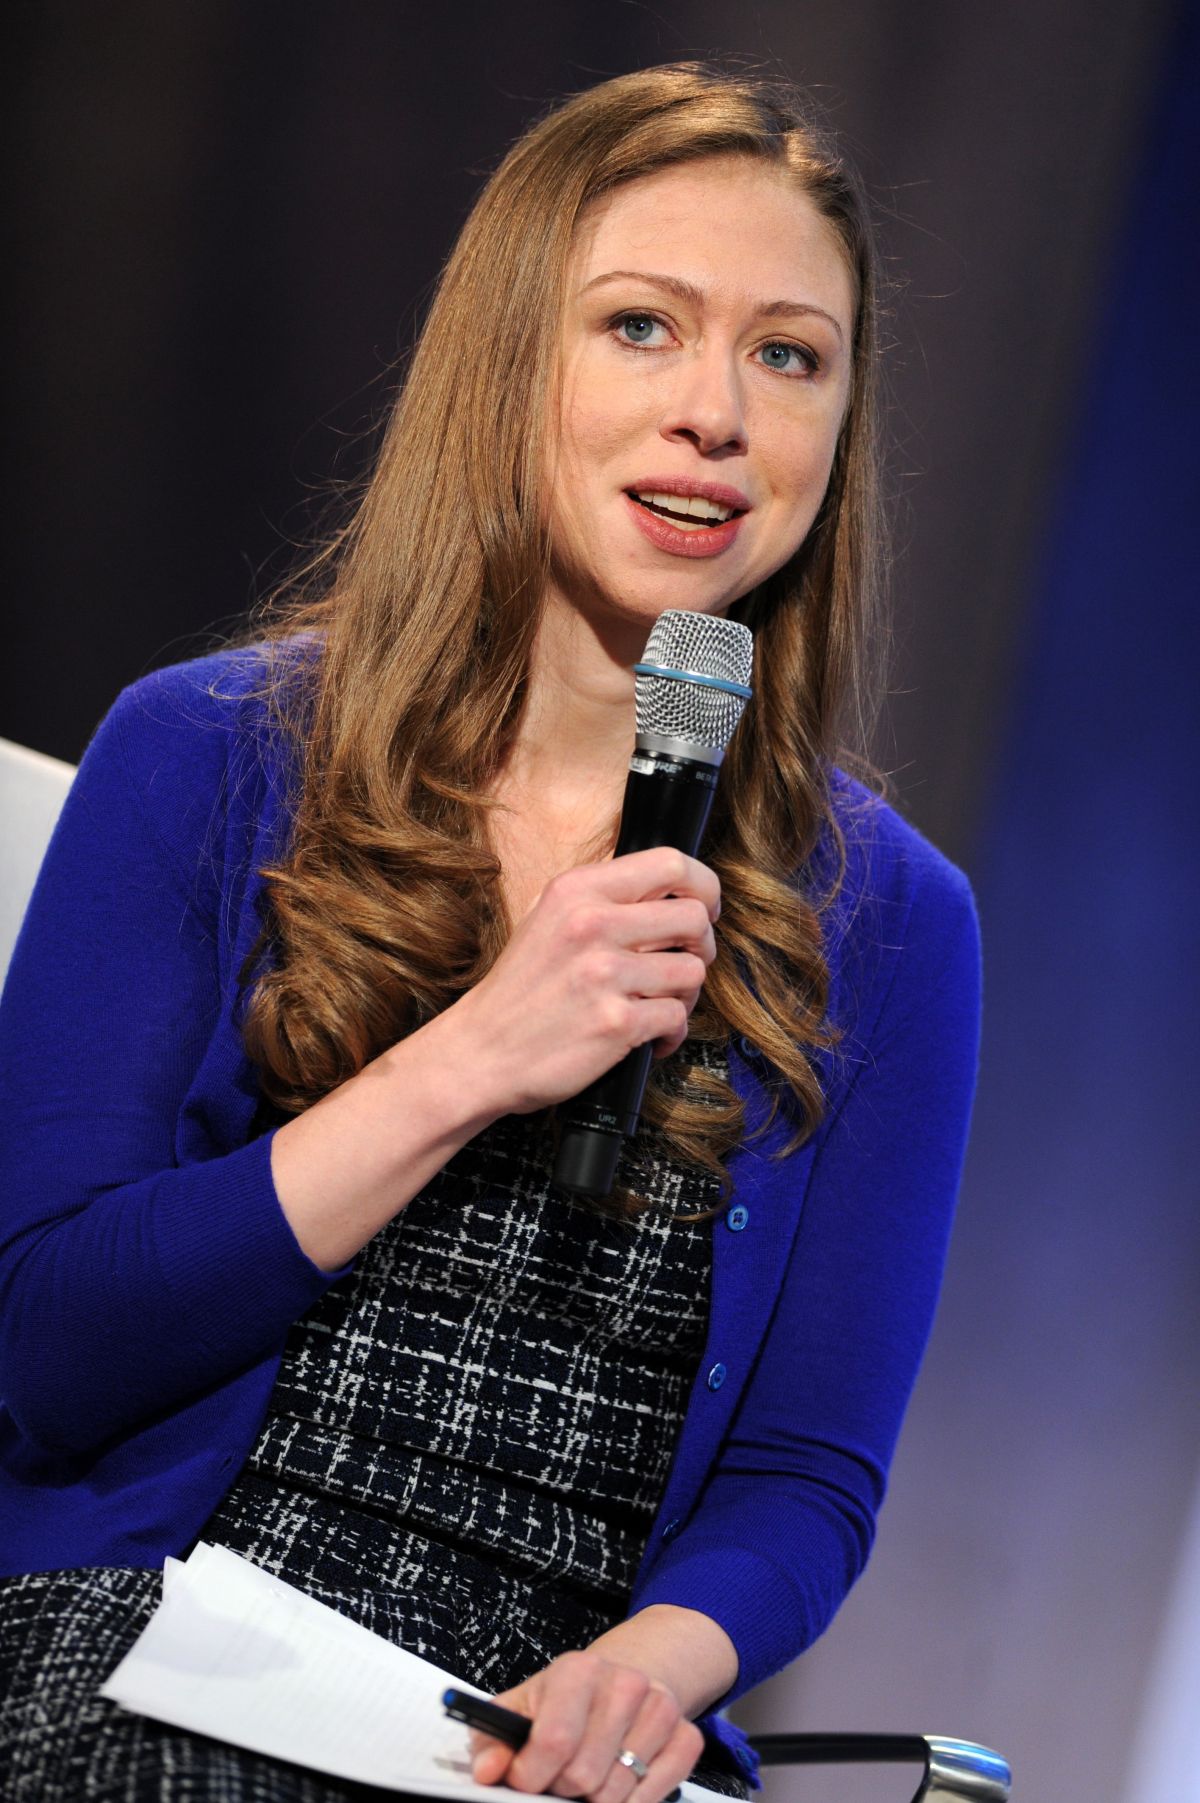 CHELSEA CLINTON at Clinton Global Initiative 2015 Annual Meeting: Day Two in New York 09/27/2015